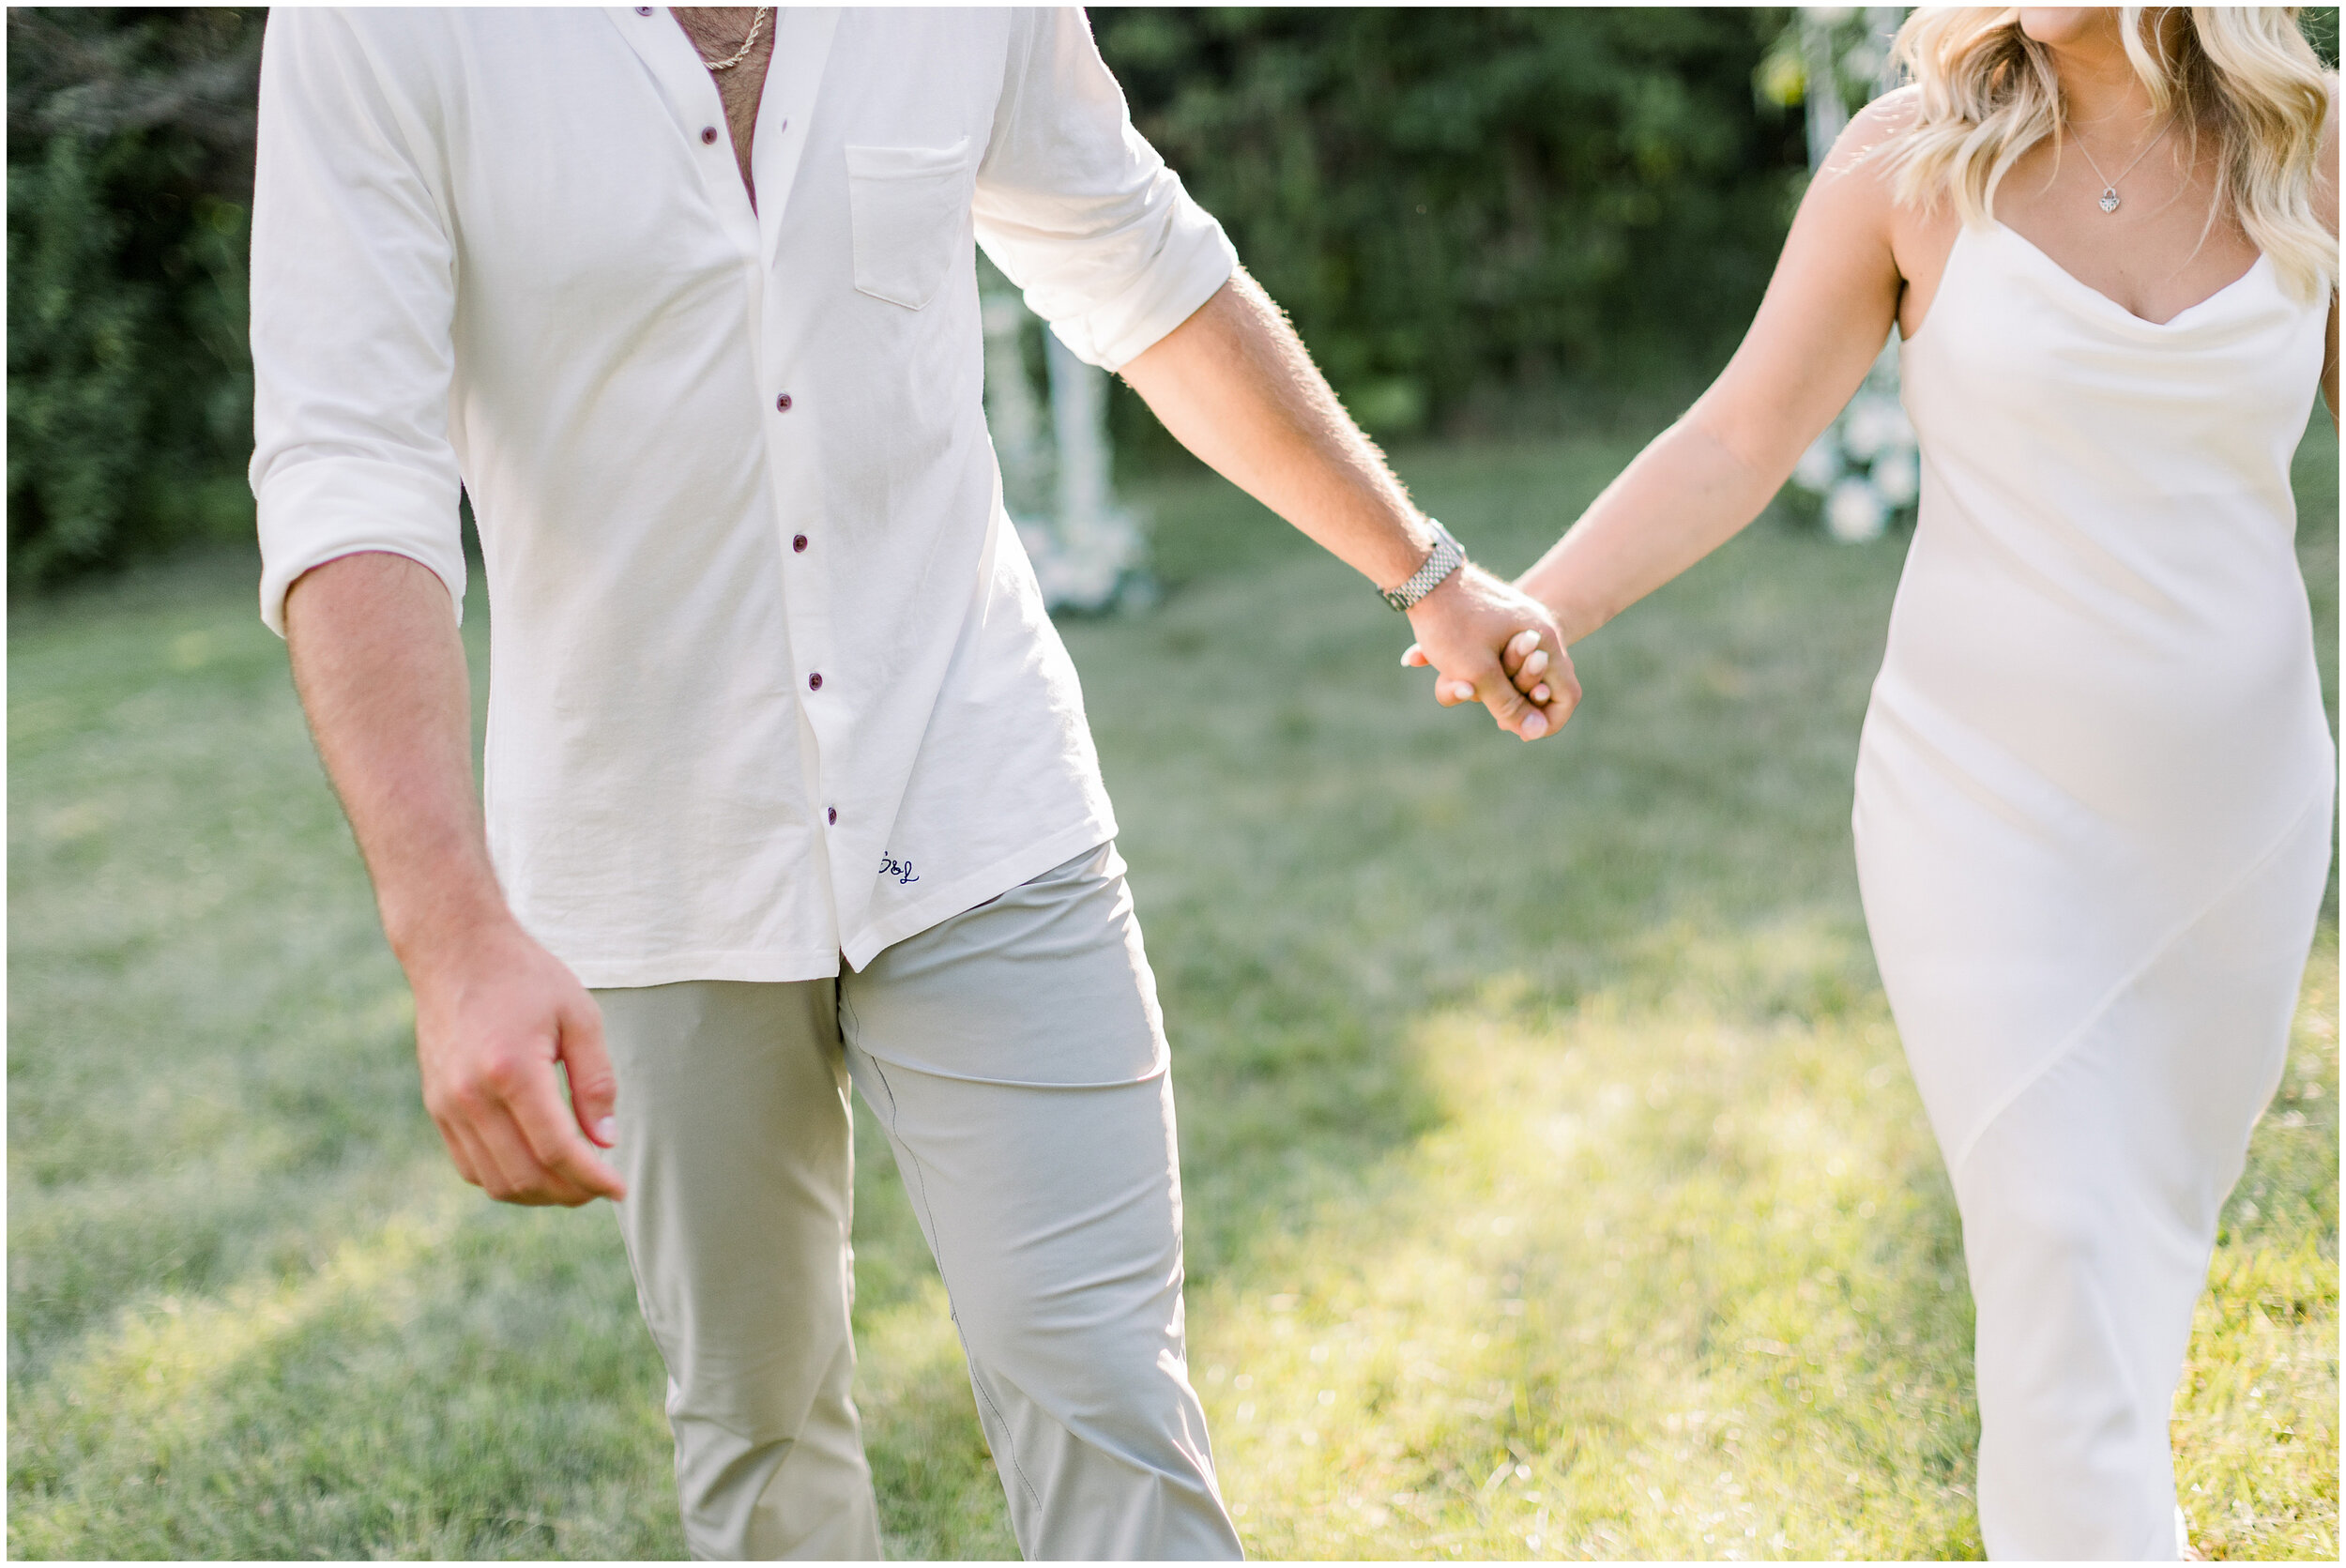  Boho bride and groom in simple white outfits for a causal outdoor backyard wedding in Ottawa, ON by Chelsea Morgan Photography. boho wedding couple outfit ideas boho wedding outfit inspo simple outfits for wedding casual wedding outfits outdoor wedd